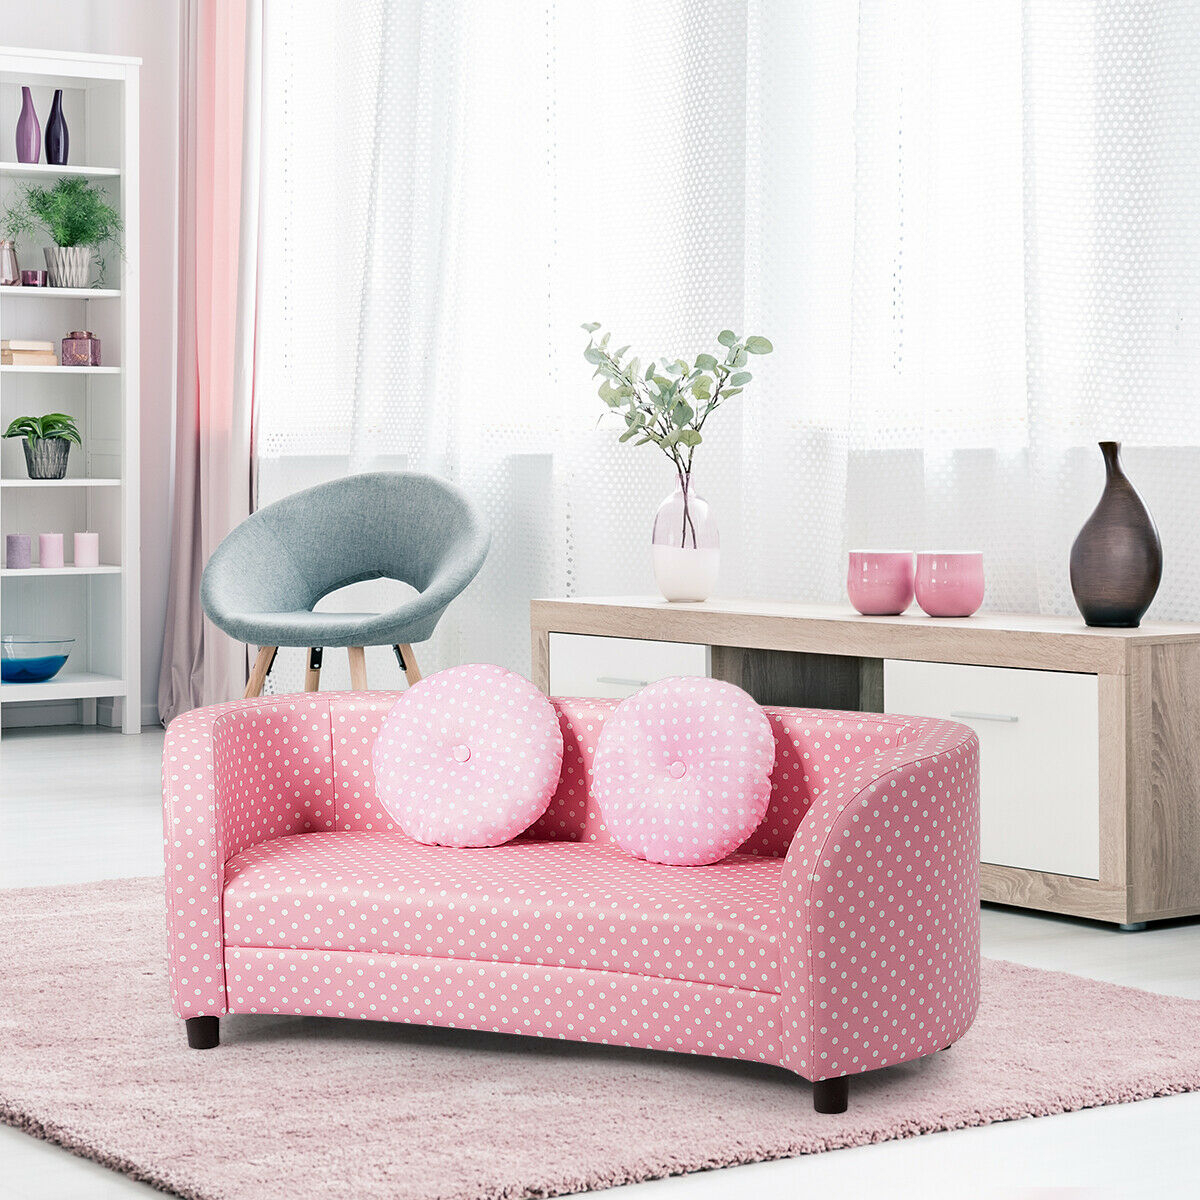 2 Seat Kids Sofa Armrest Chair With Two Cloth Pillows Perfect For Girls Pink